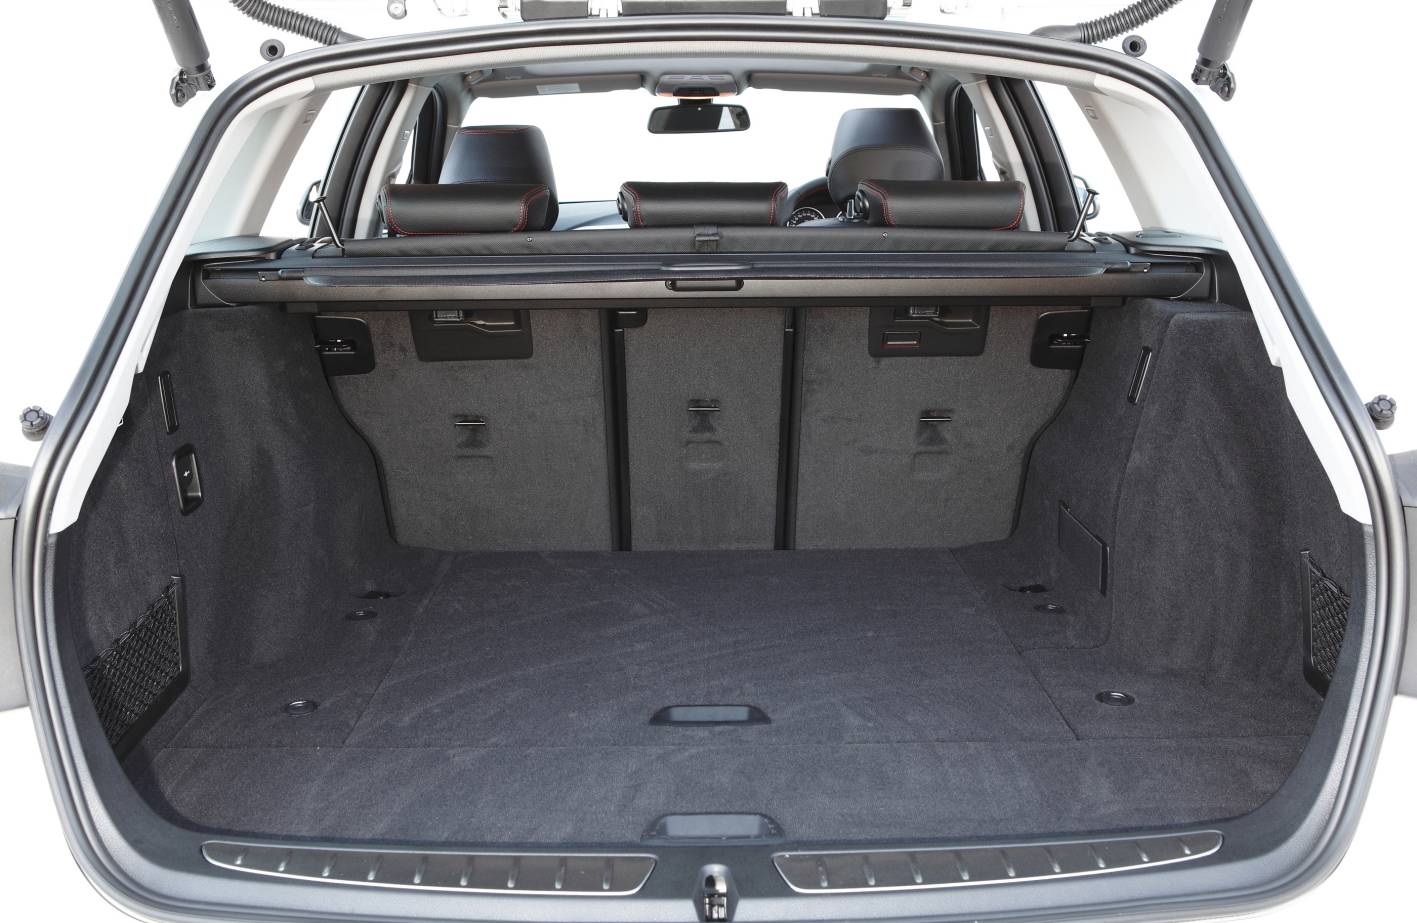 Bmw 335i convertible trunk space #7